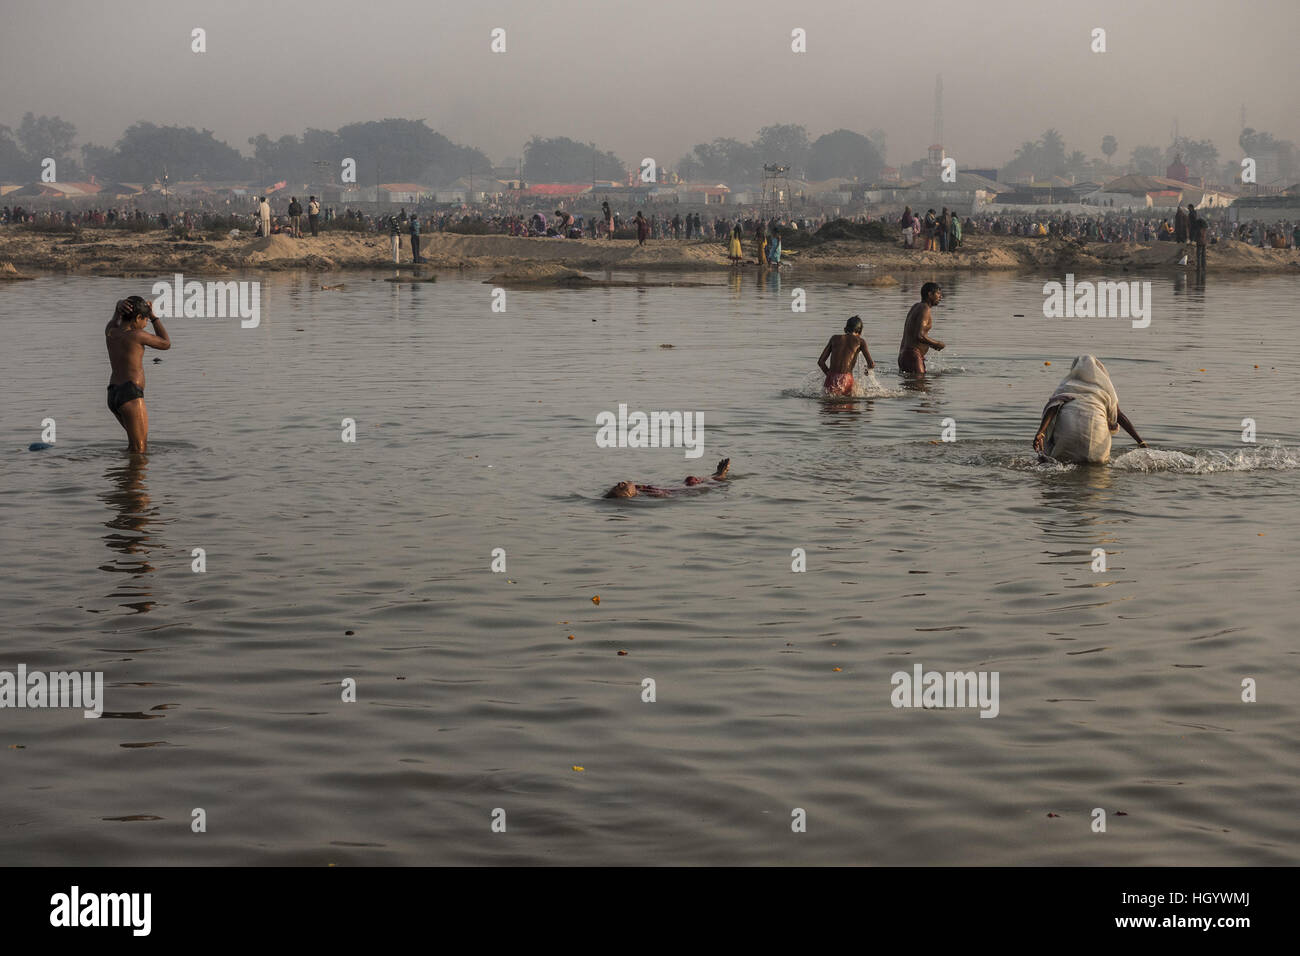 Kolkata, Indian state West Bengal. 14th Jan, 2017. Indian Hindu devotees take a holy dip in the Ajay river near the Joydev Fair, some 200km away from Kolkata, capital of eastern Indian state West Bengal, Jan. 14, 2017. A large number of Hindu pilgrims converge for the Joydev Fair on the occasion of Makar Sankranti, a holy day of the Hindu calendar, during which taking a dip is considered to be of great religious significance. © Tumpa Mondal/Xinhua/Alamy Live News Stock Photo